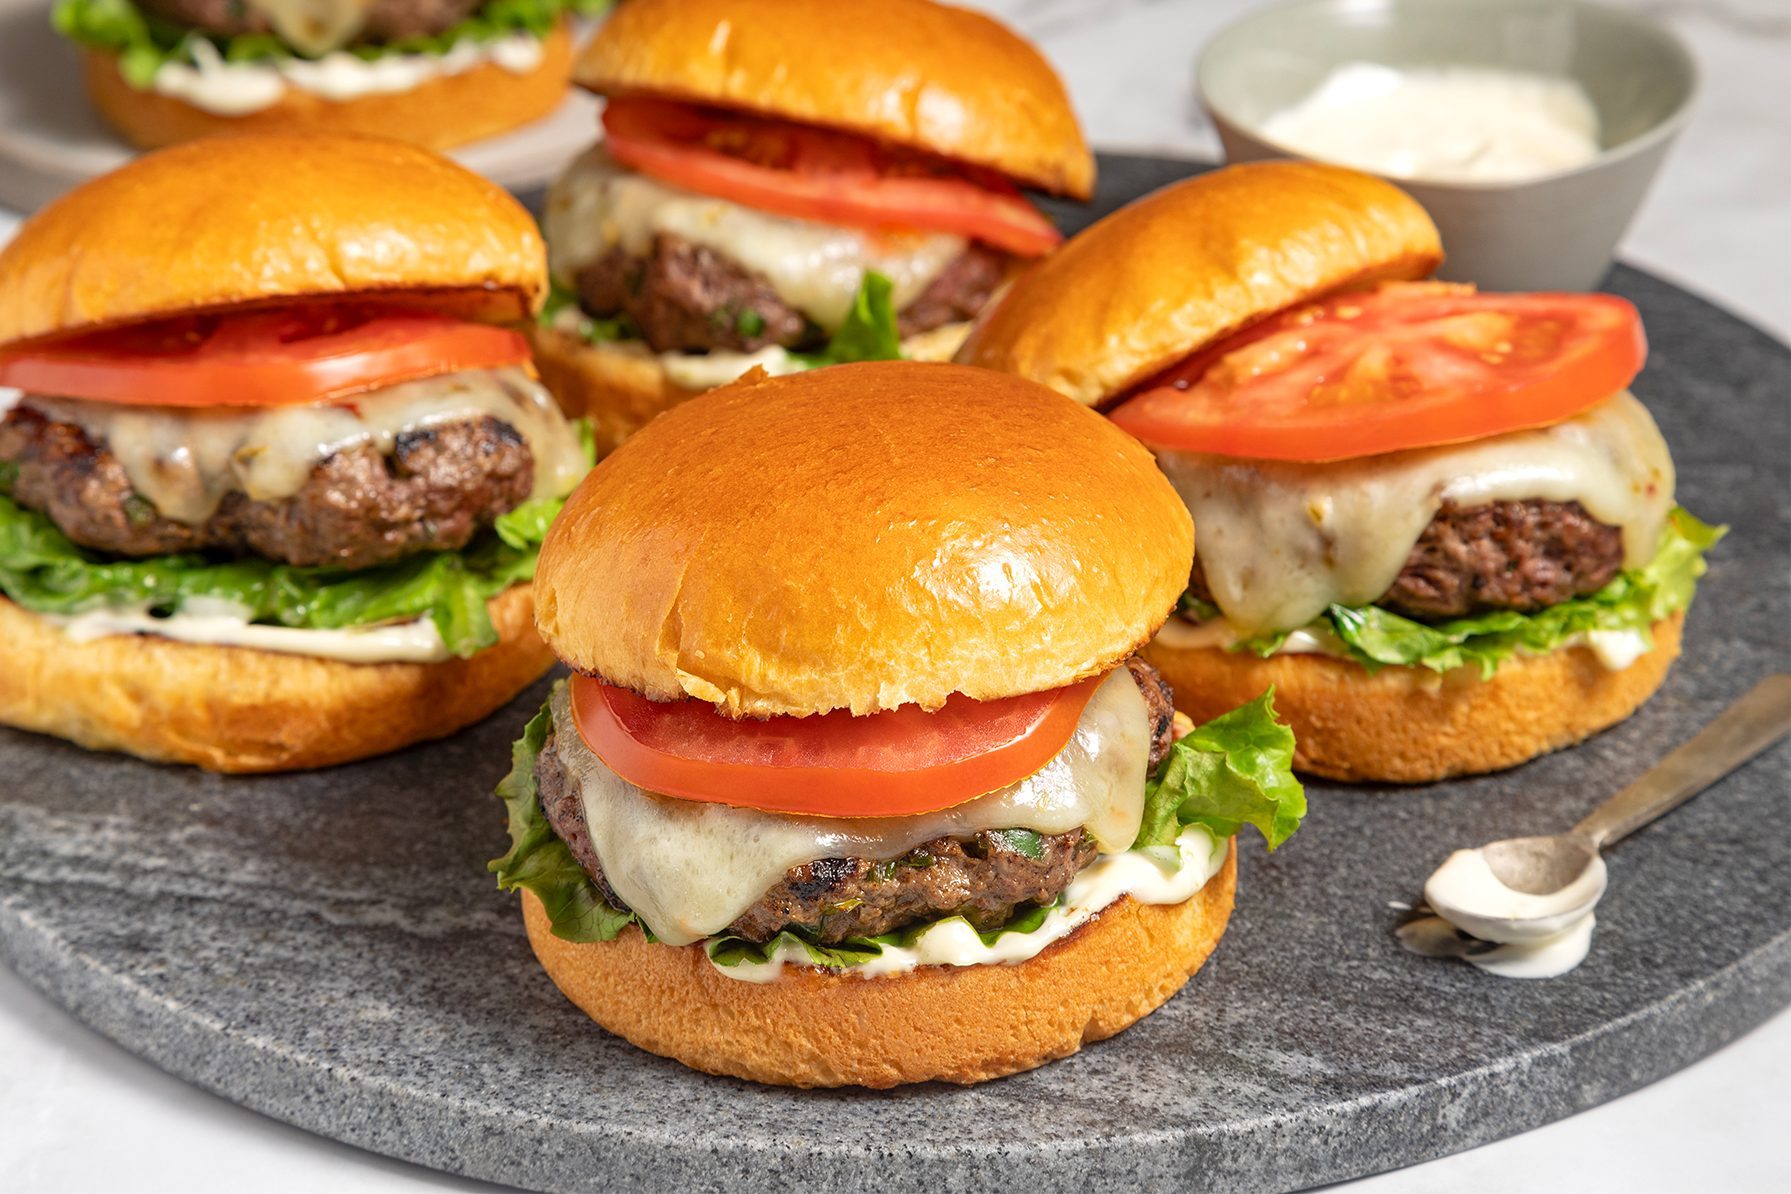 A plate of five cheeseburgers with melted cheese, lettuce, and tomato slices on a round, dark grey serving platter.